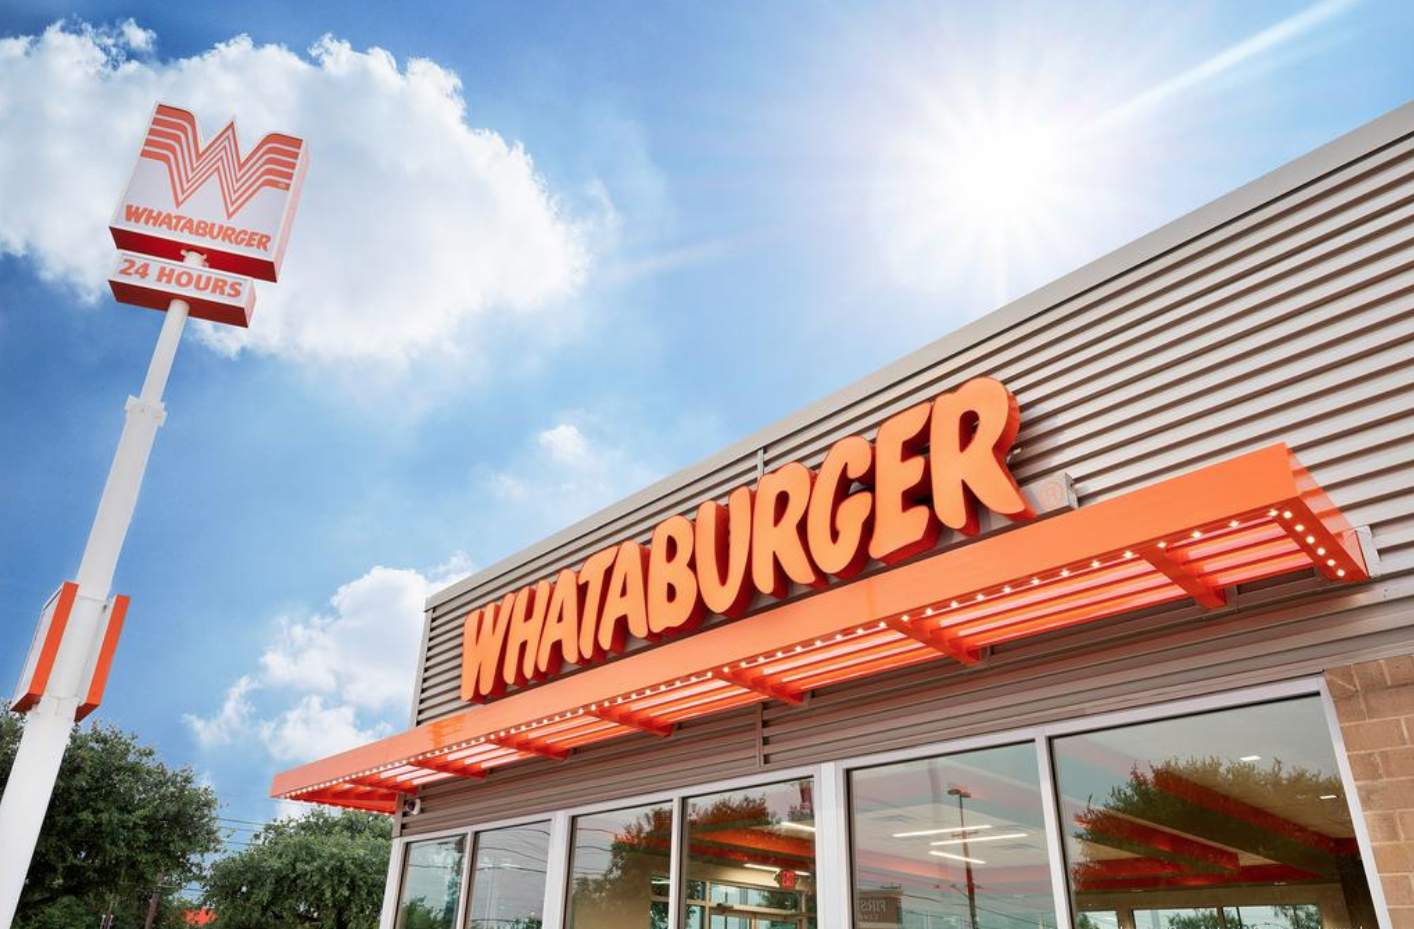 Whataburger to Launch 'Fancy Ketchup' in Grocery Stores - Eater